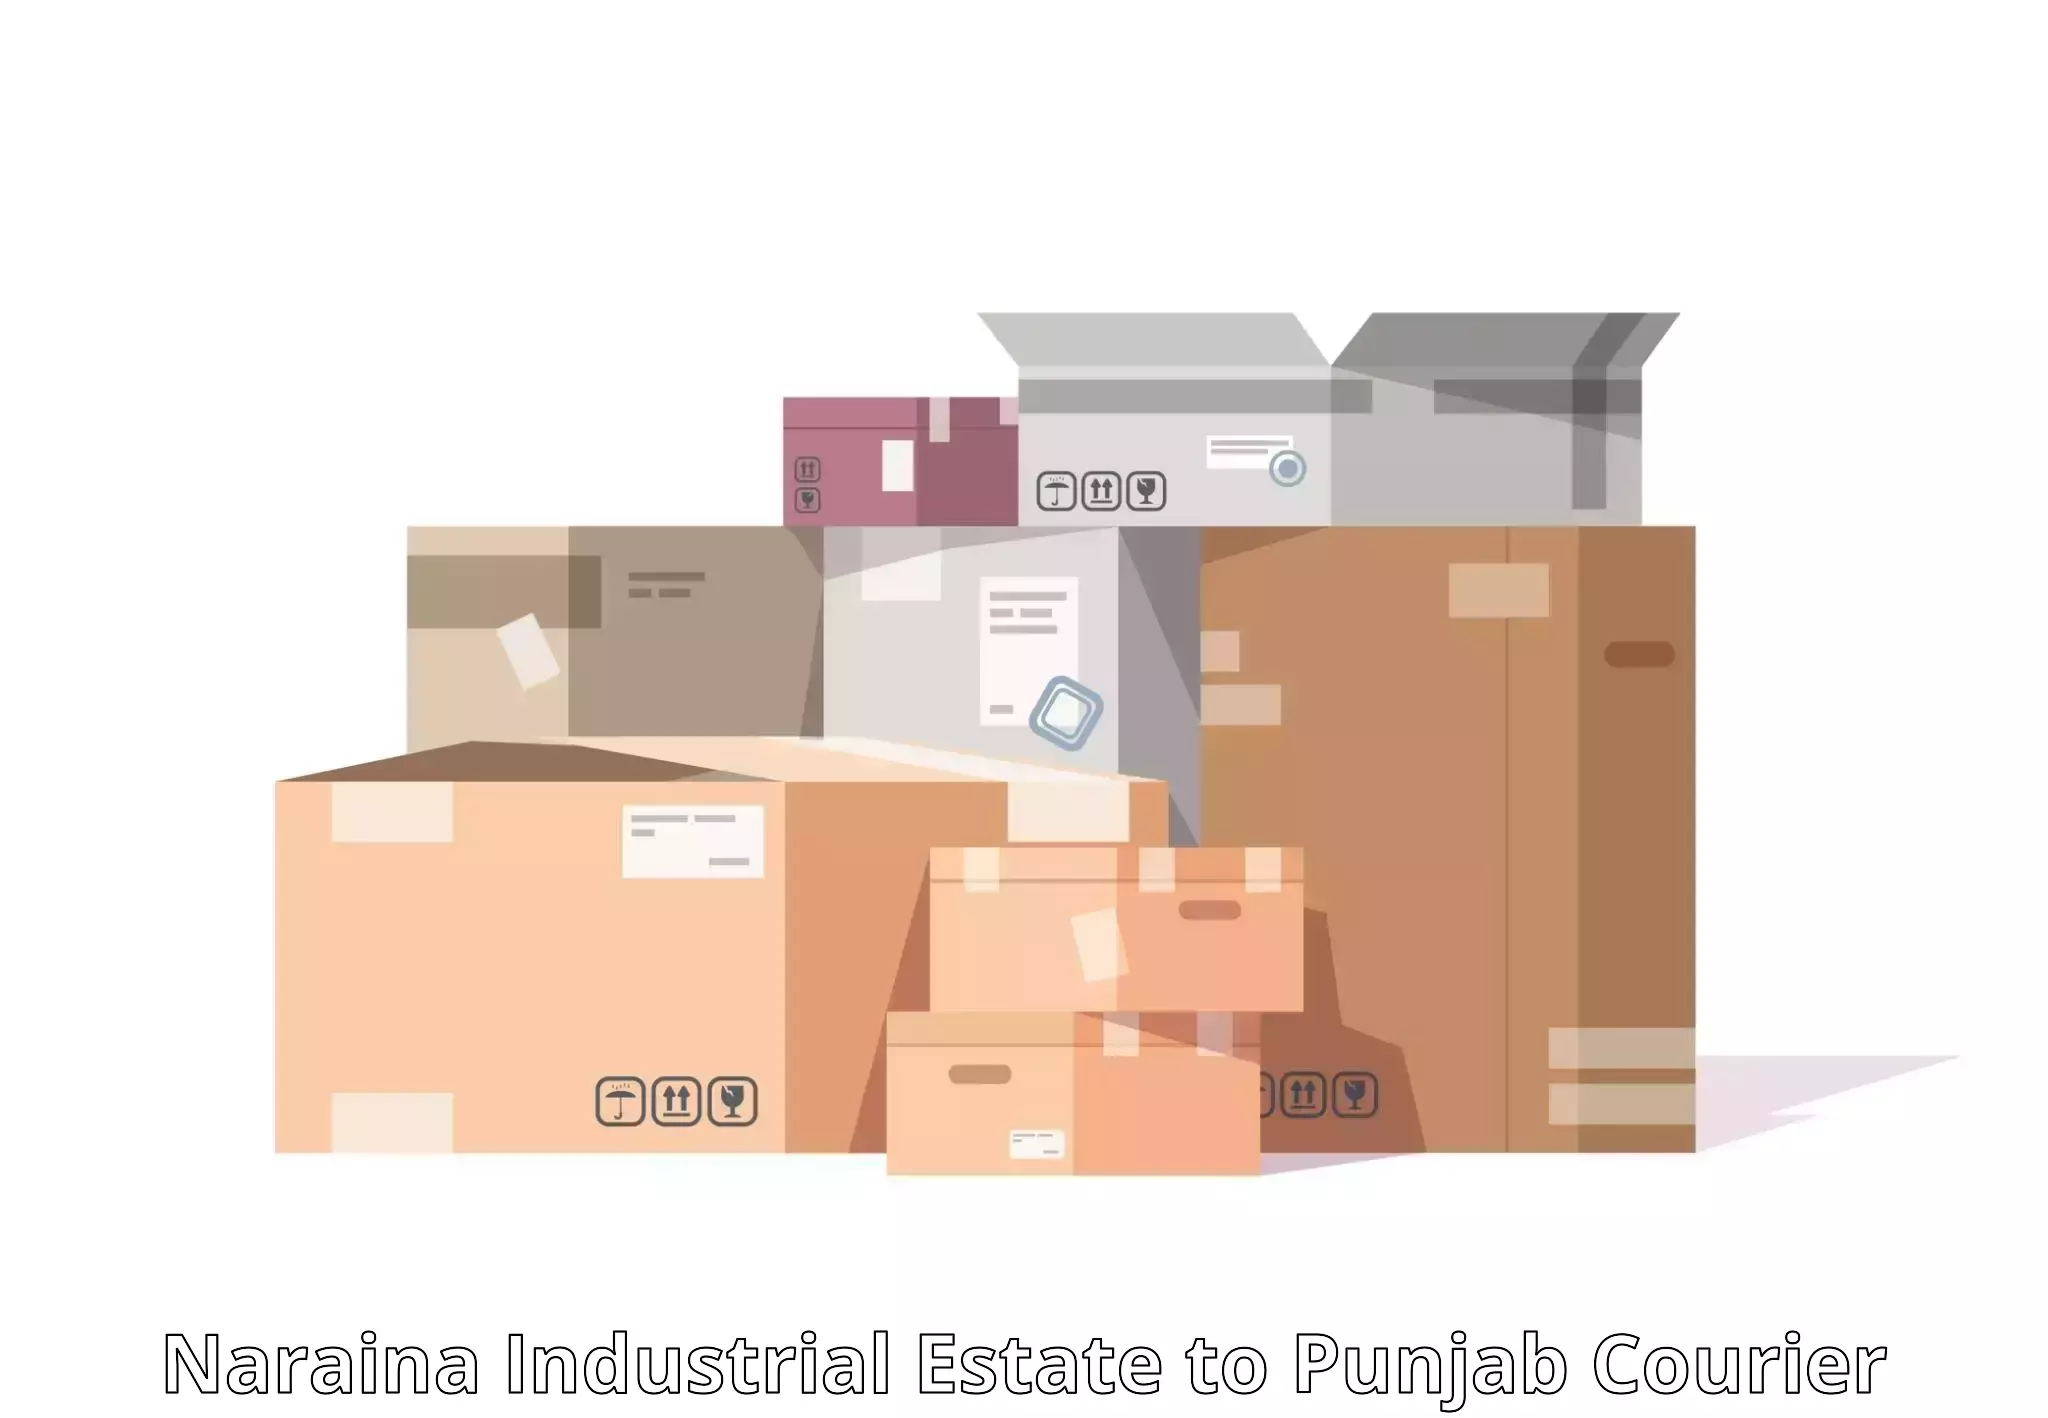 Global courier networks Naraina Industrial Estate to Punjab